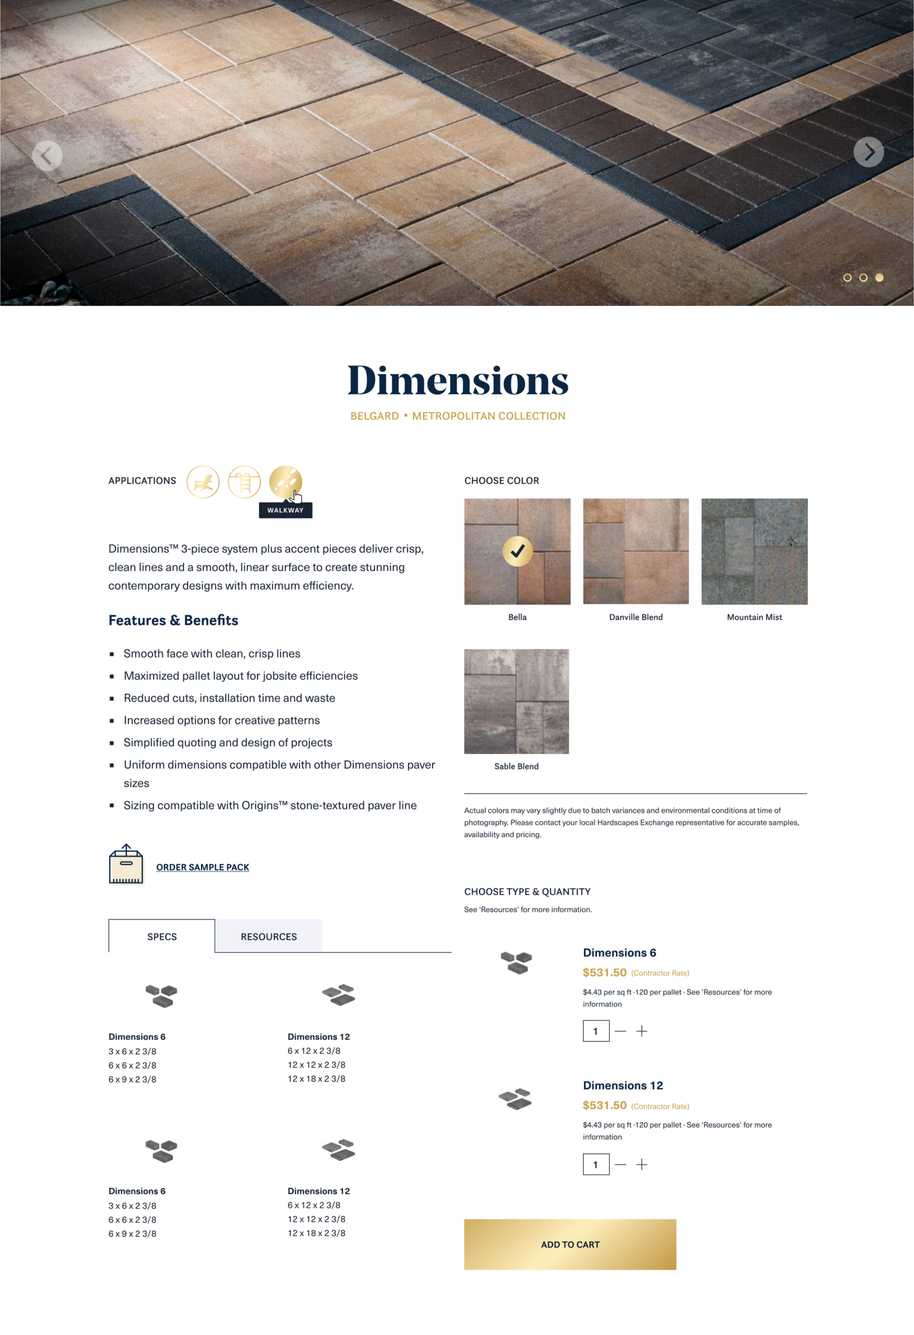 Product detail page for The Hardscape Exchange website